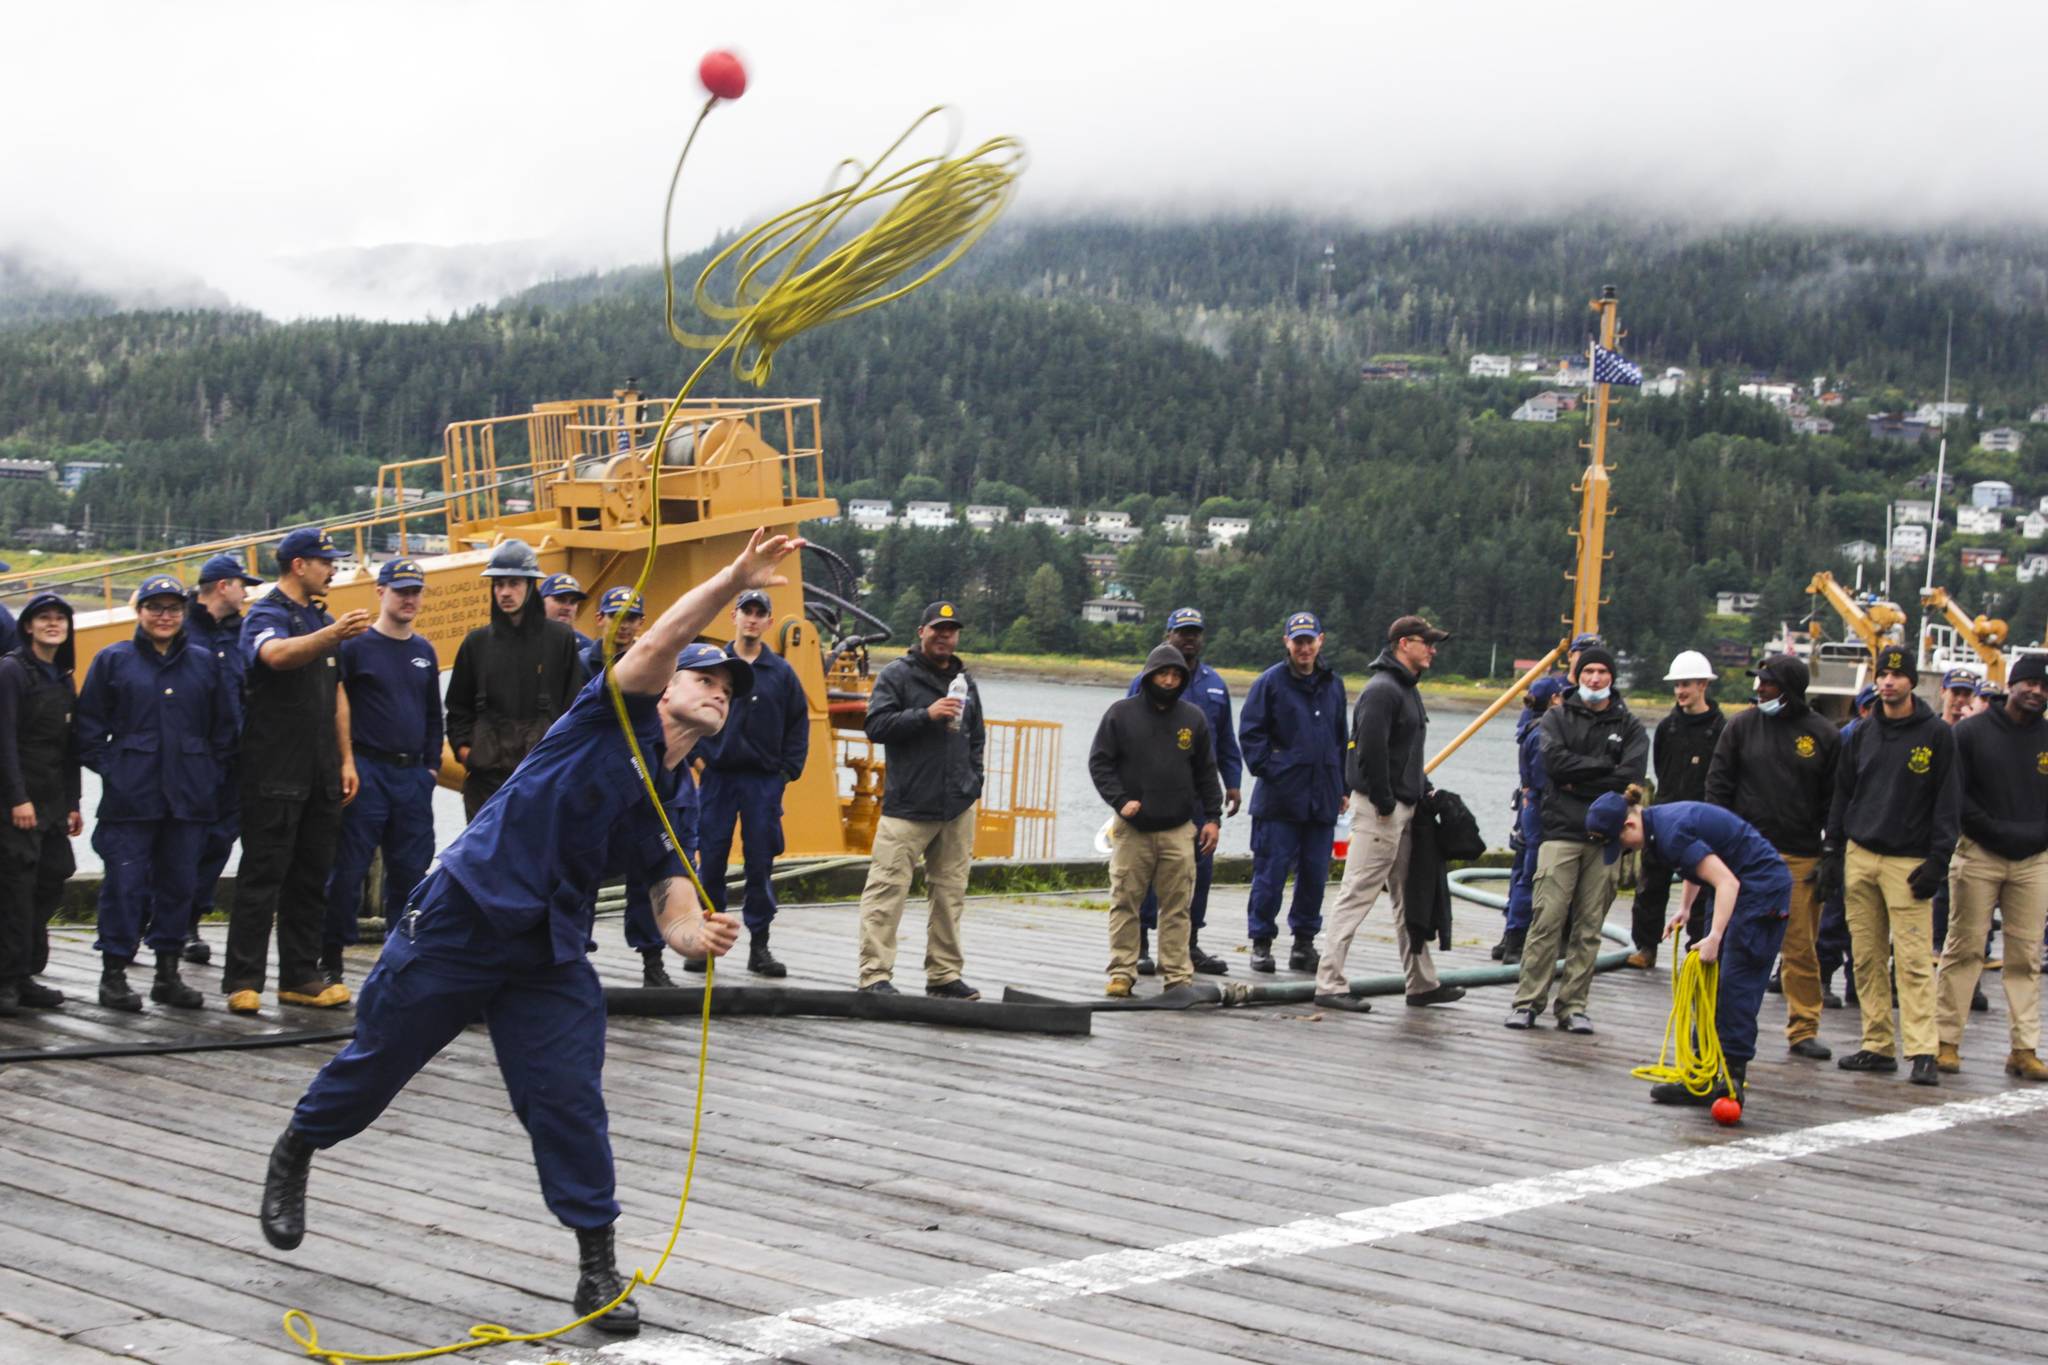 Petty Officer 1st Class Joseph Gauvain participates in the line toss, one of the inter-vessel competitions during this year’s Buoy Tender Roundup at Sector Juneau, on Wednesday, Aug. 25, 2021. (Michael S. Lockett / Juneau Empire)